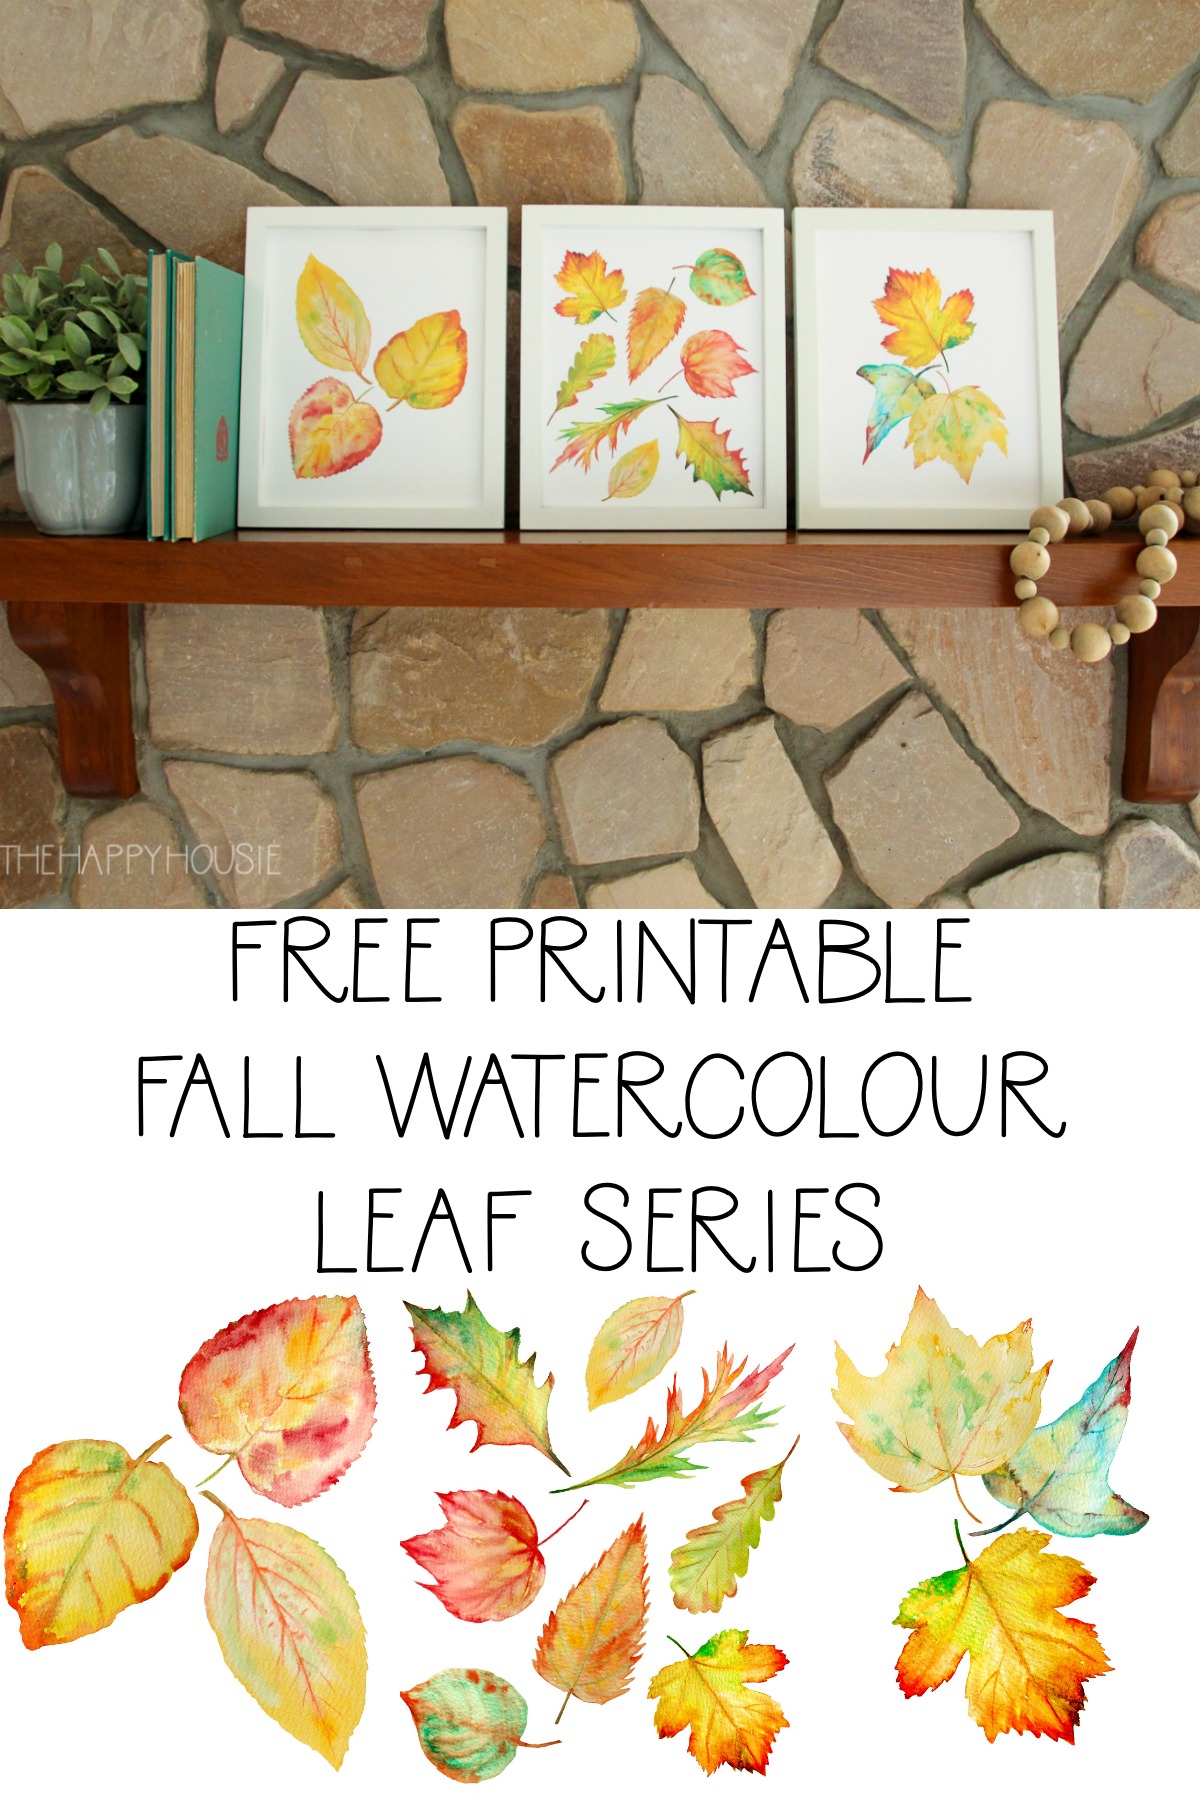 Free Printable Fall Watercolour Leaf Series poster.